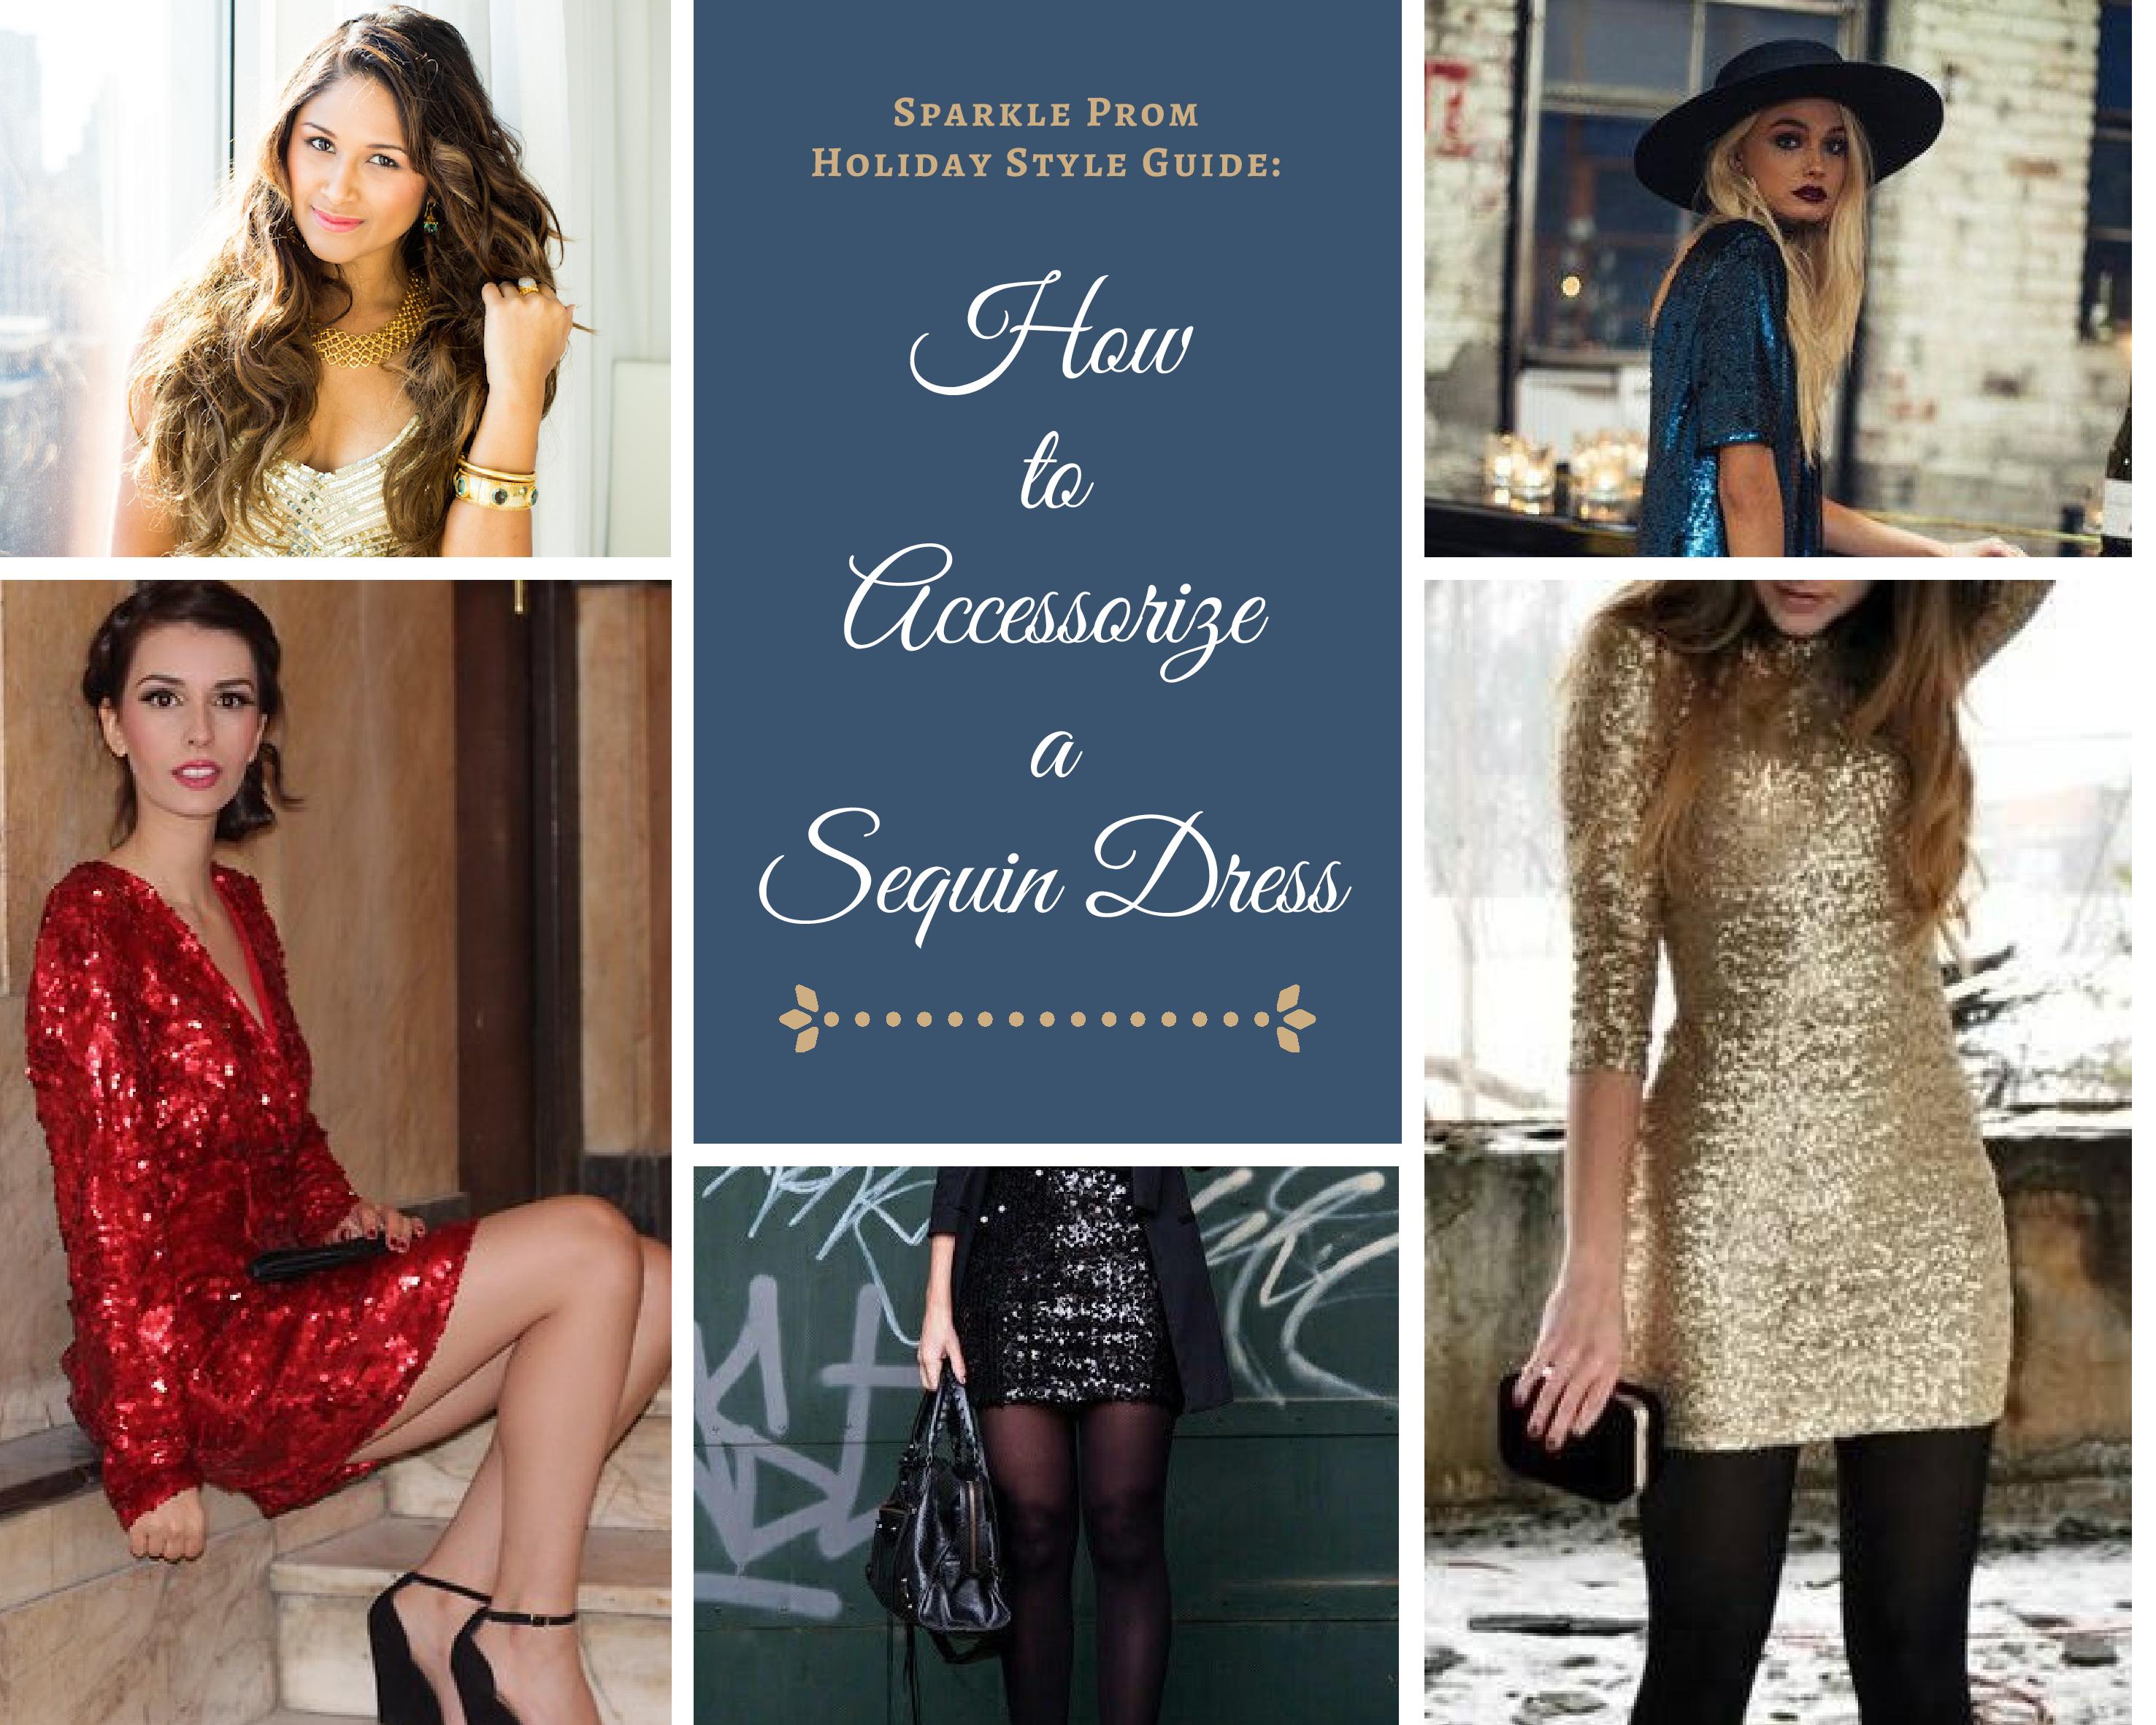 Positiv Procent overskydende How to Accessorize a Sequin Dress - Sparkle Prom